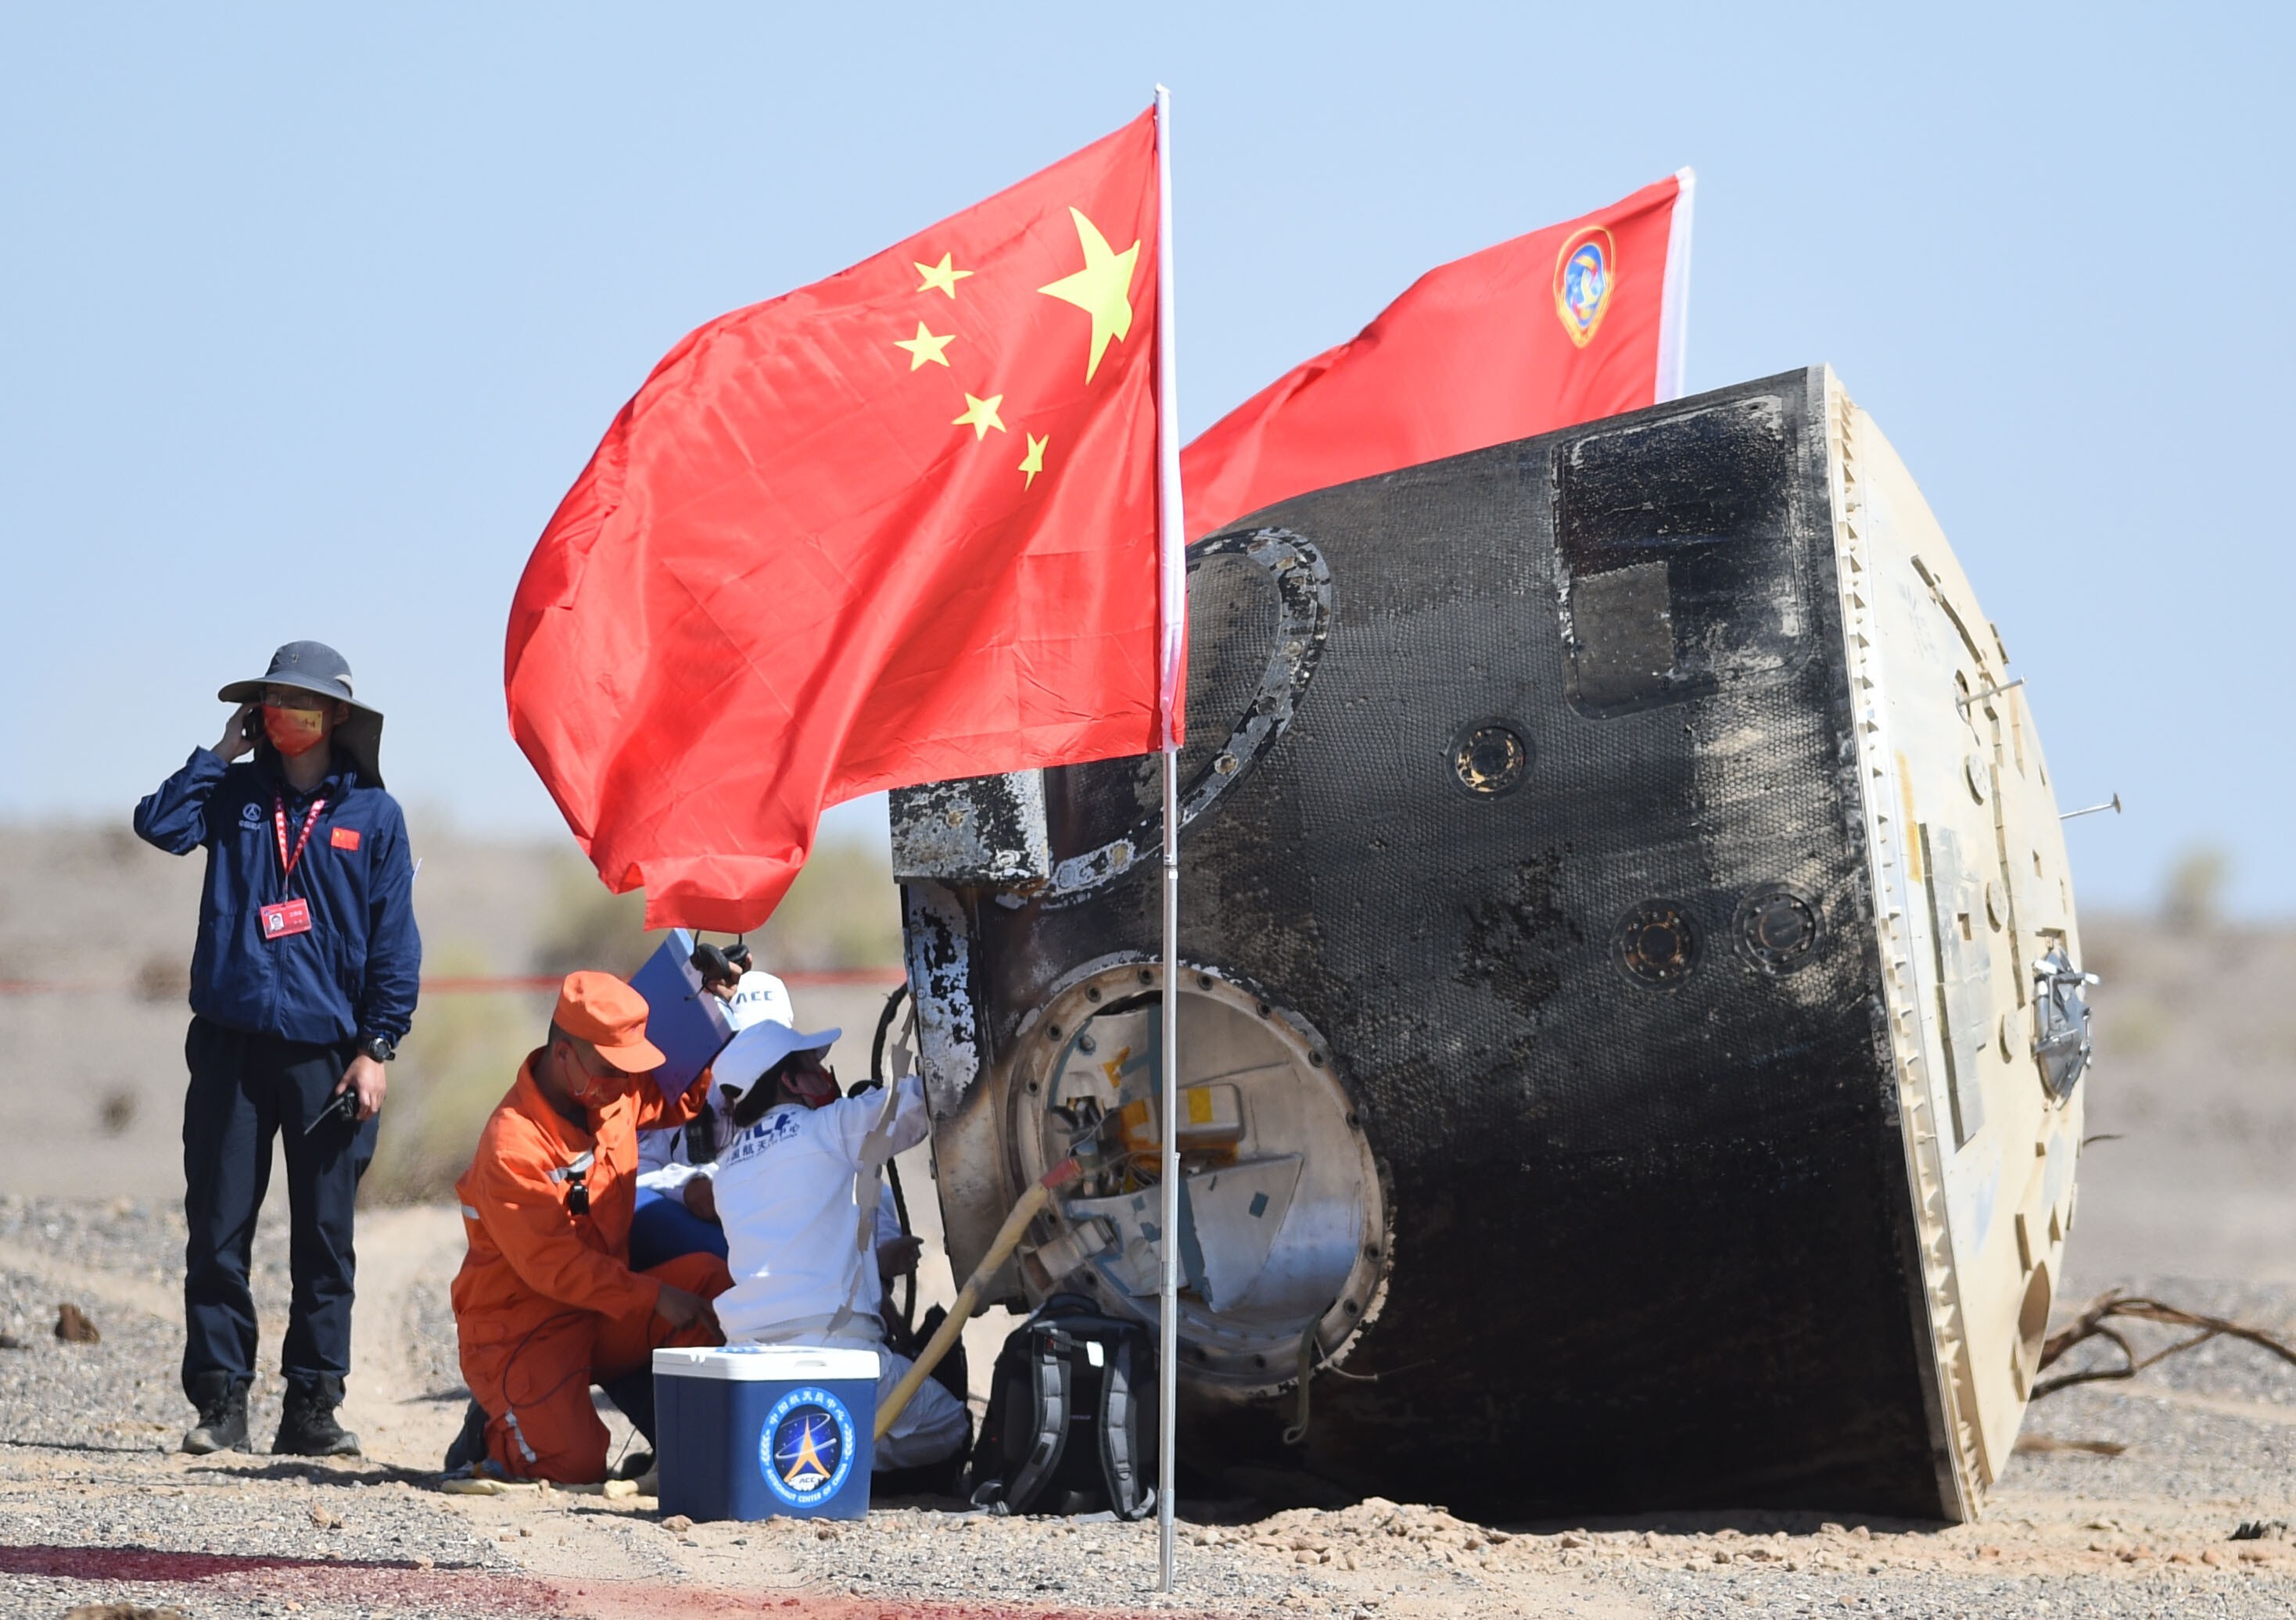 The space capsule’s return to Earth was broadcast throughout China. Photo: Xinhua